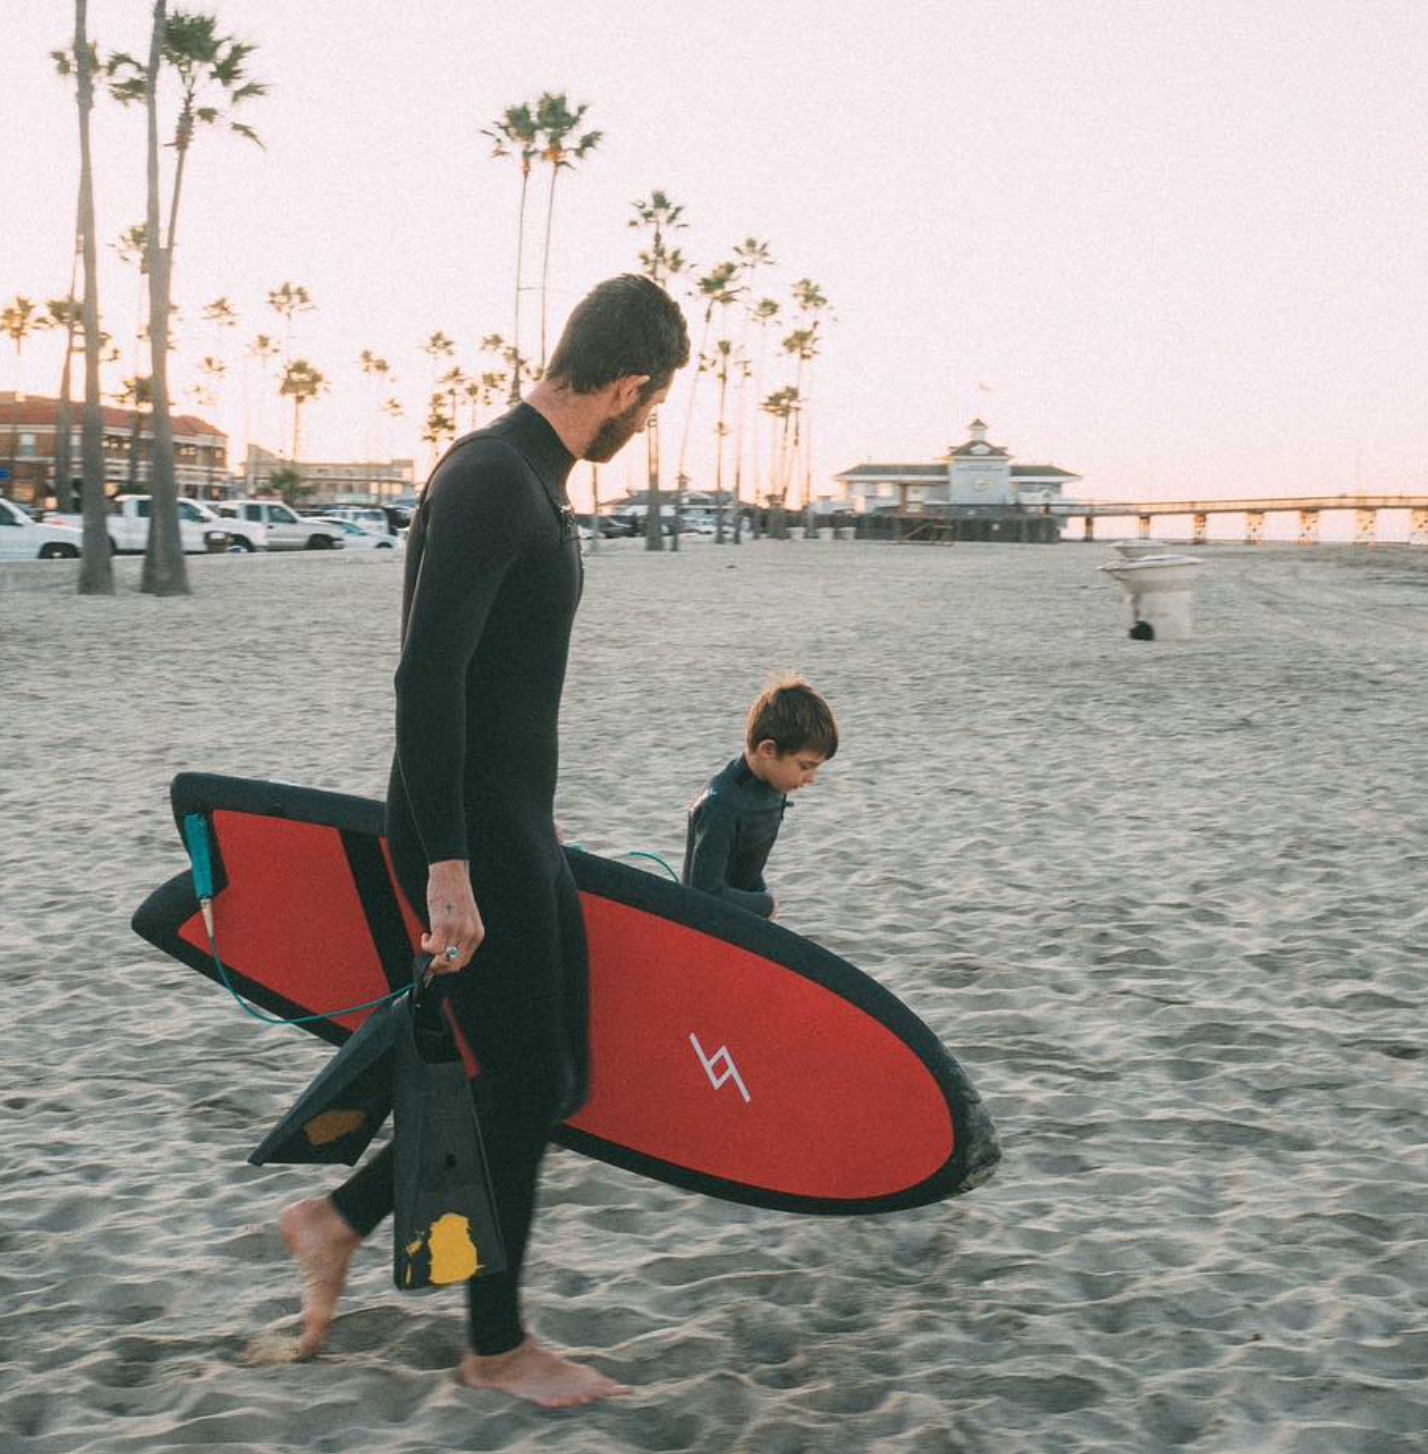 Man in a wetsuit on a beach carrying a red 5 foot 3 inch Formula Fun Foamies Twinnie surfboard walking next to a child